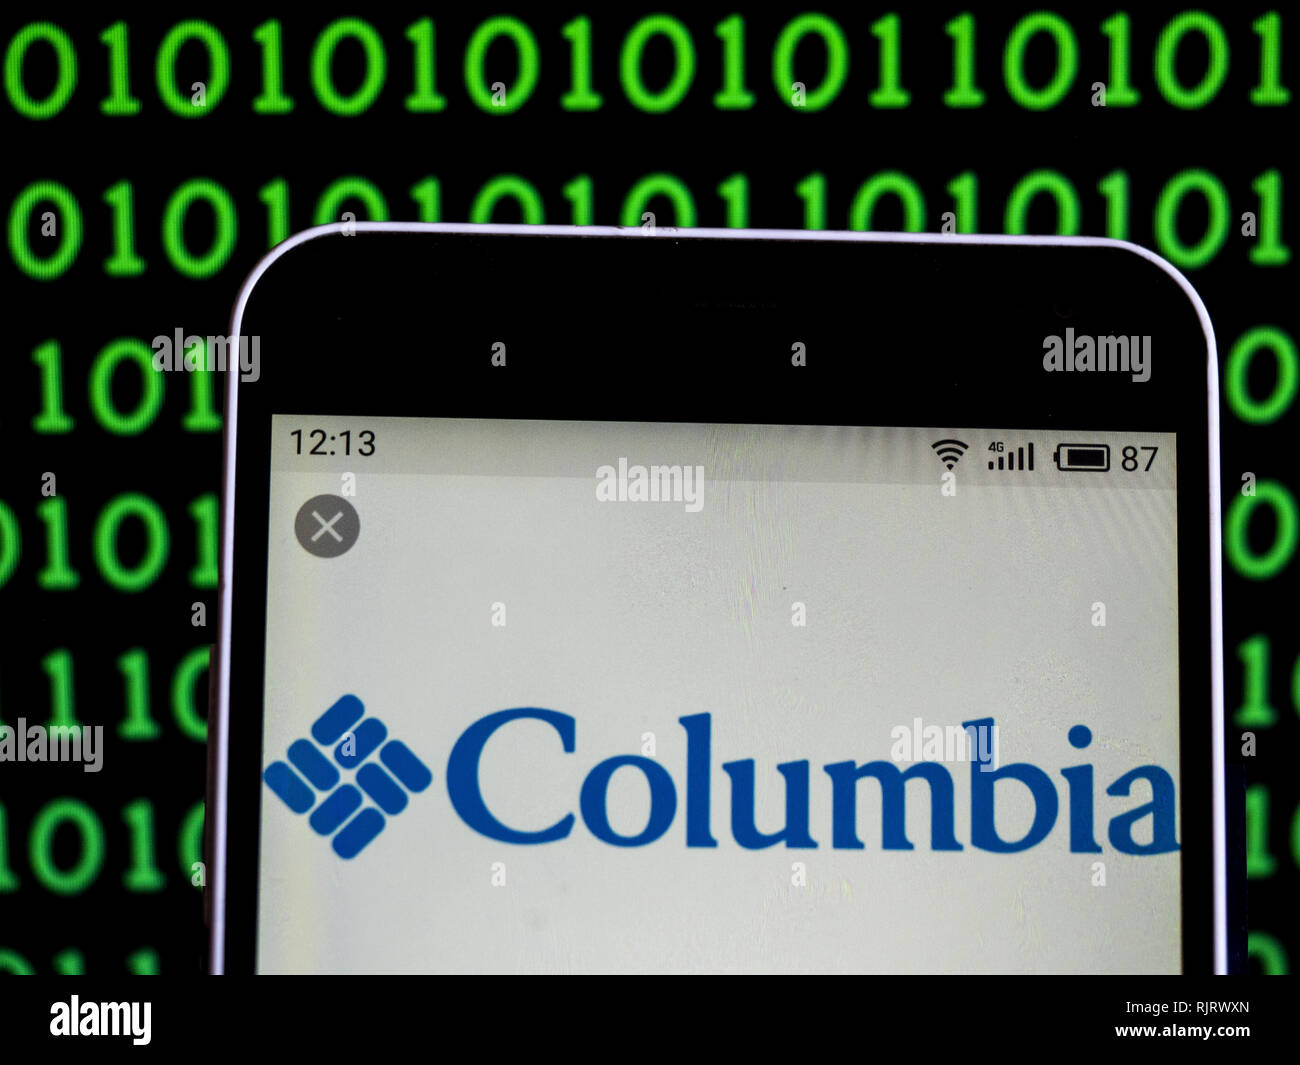 Columbia sportswear company logo hi-res stock photography and images - Alamy